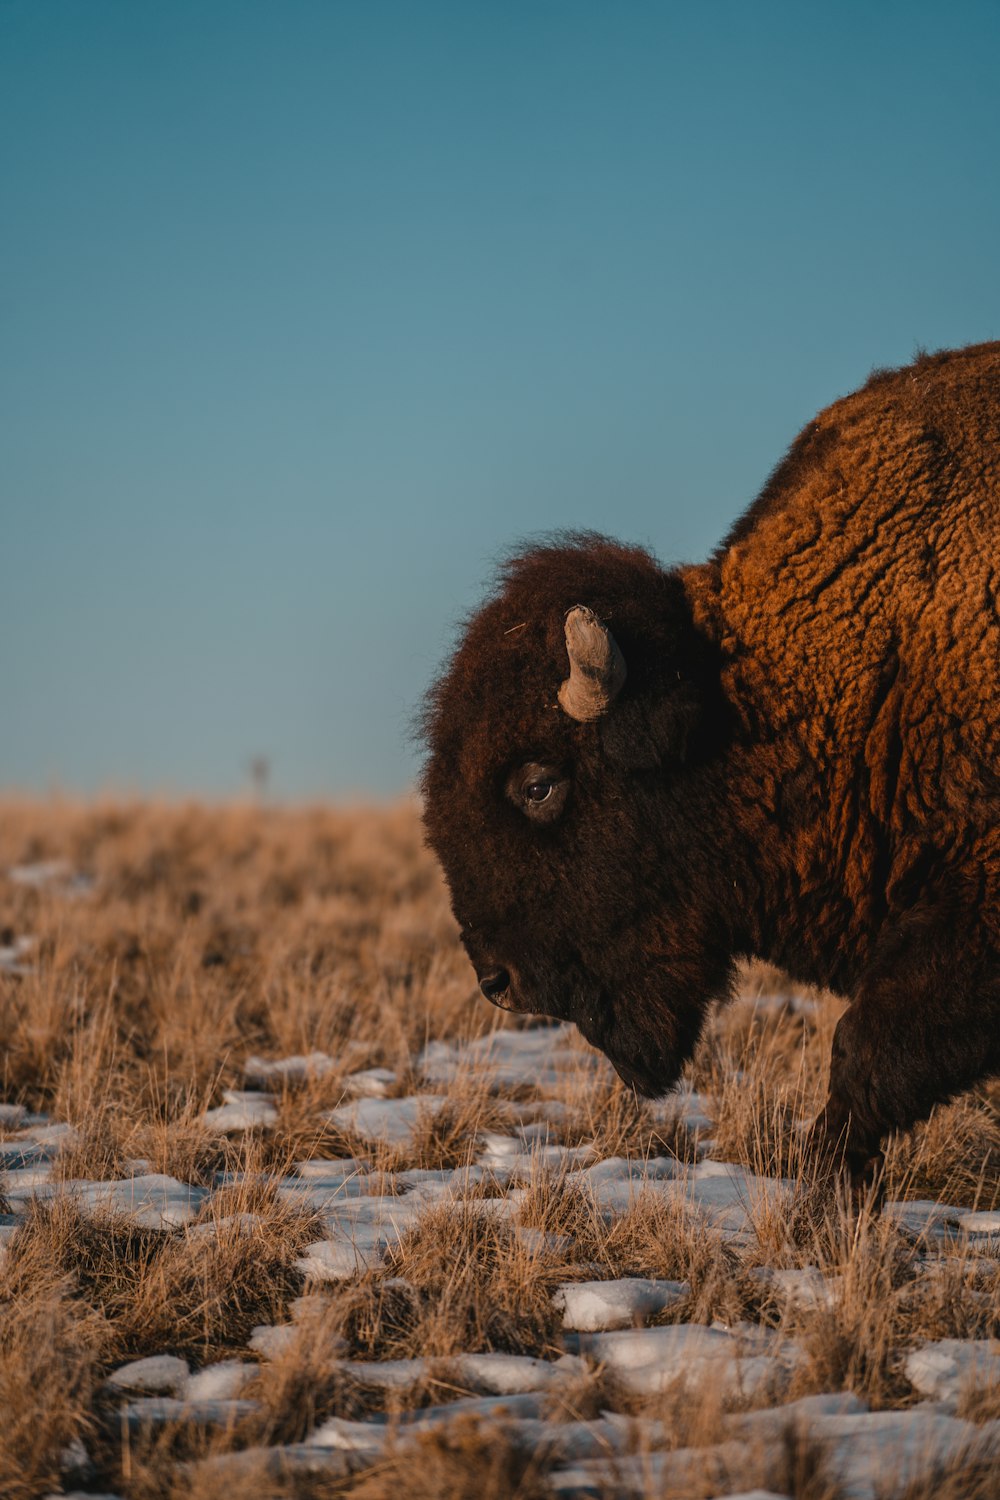 a bison is standing in a snowy field